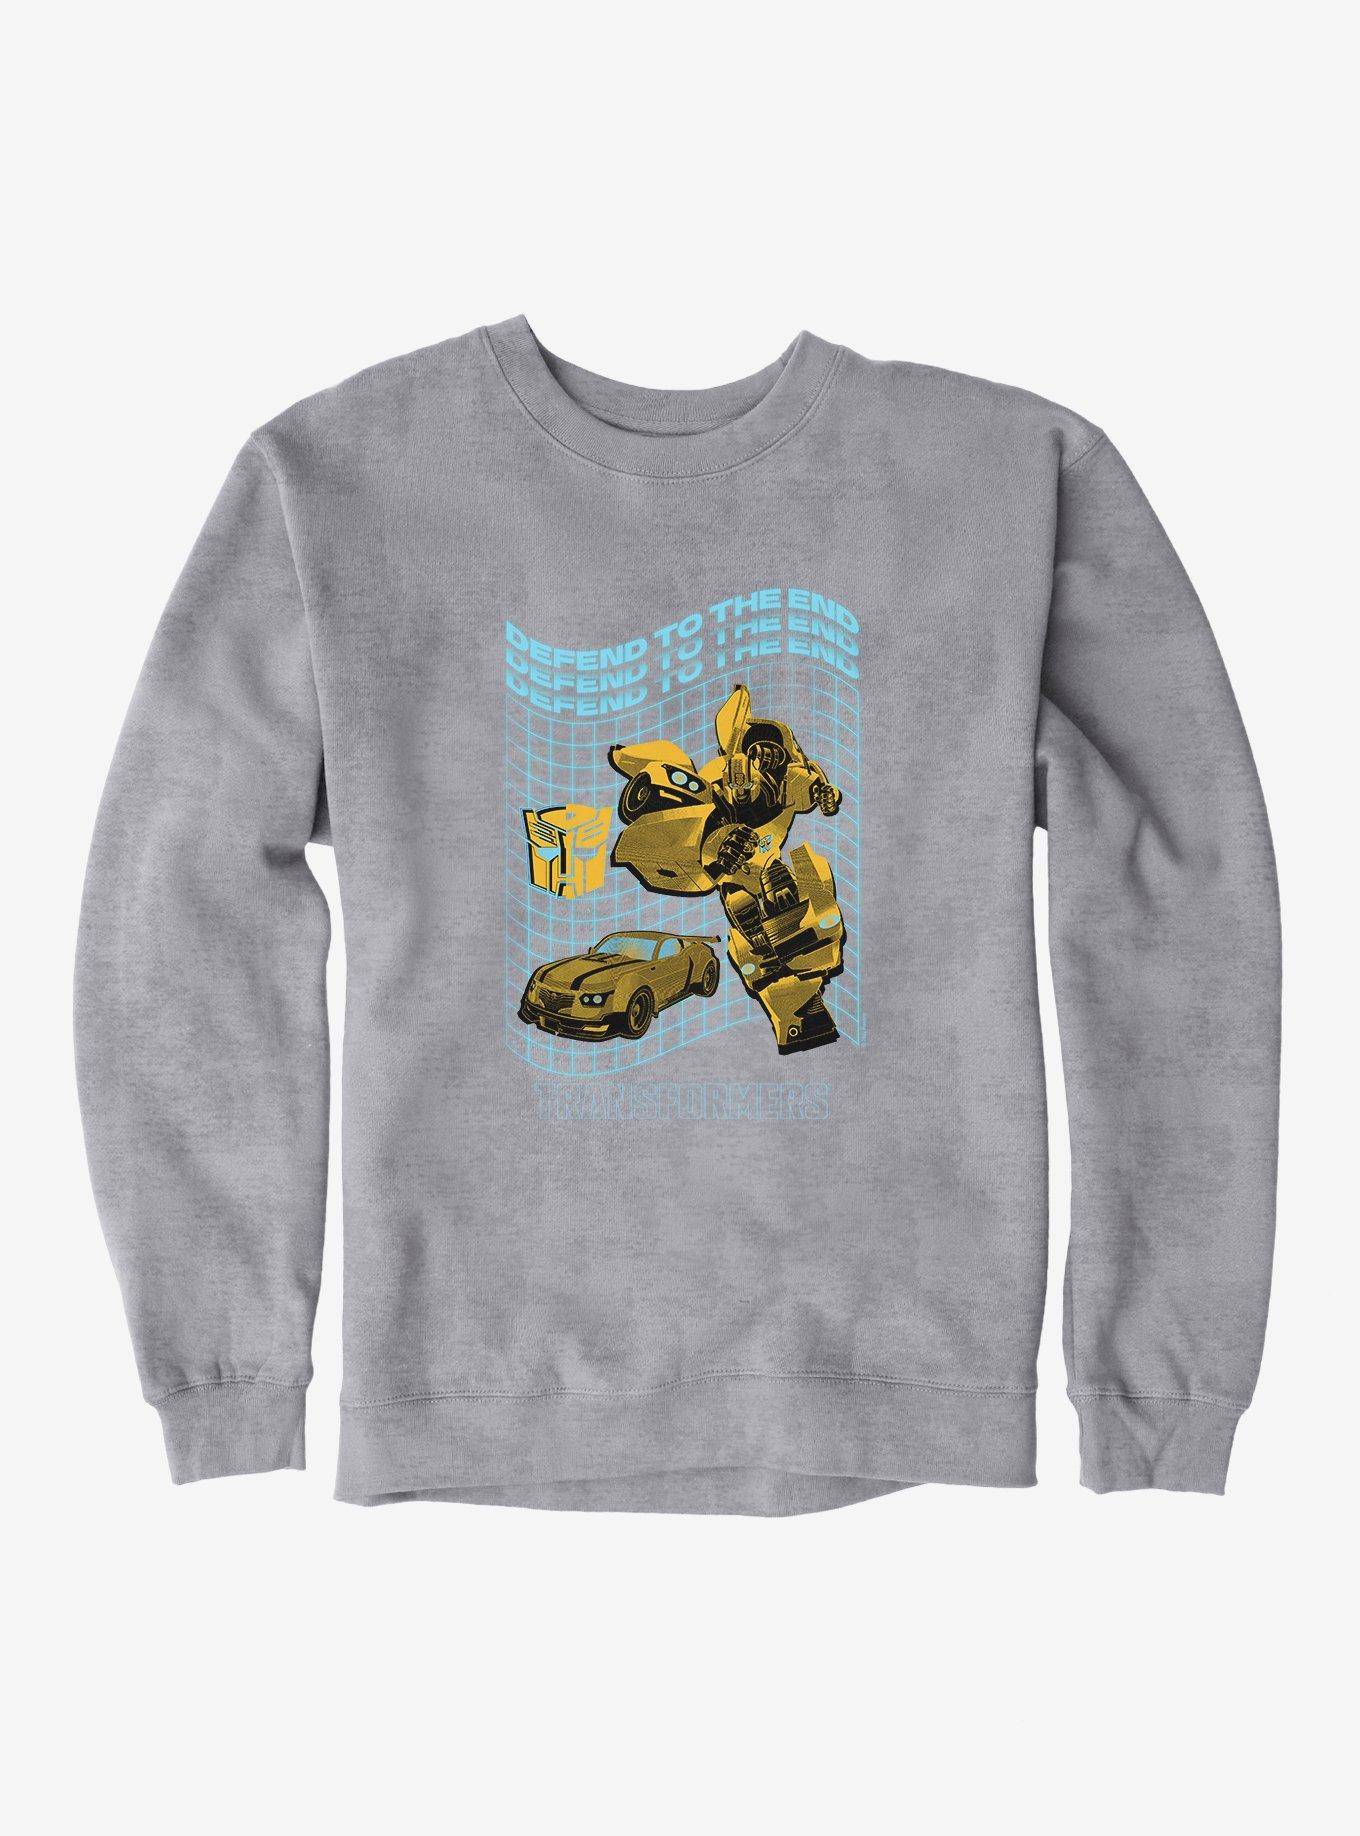 Transformers Defend To The End Bumblebee Sweatshirt